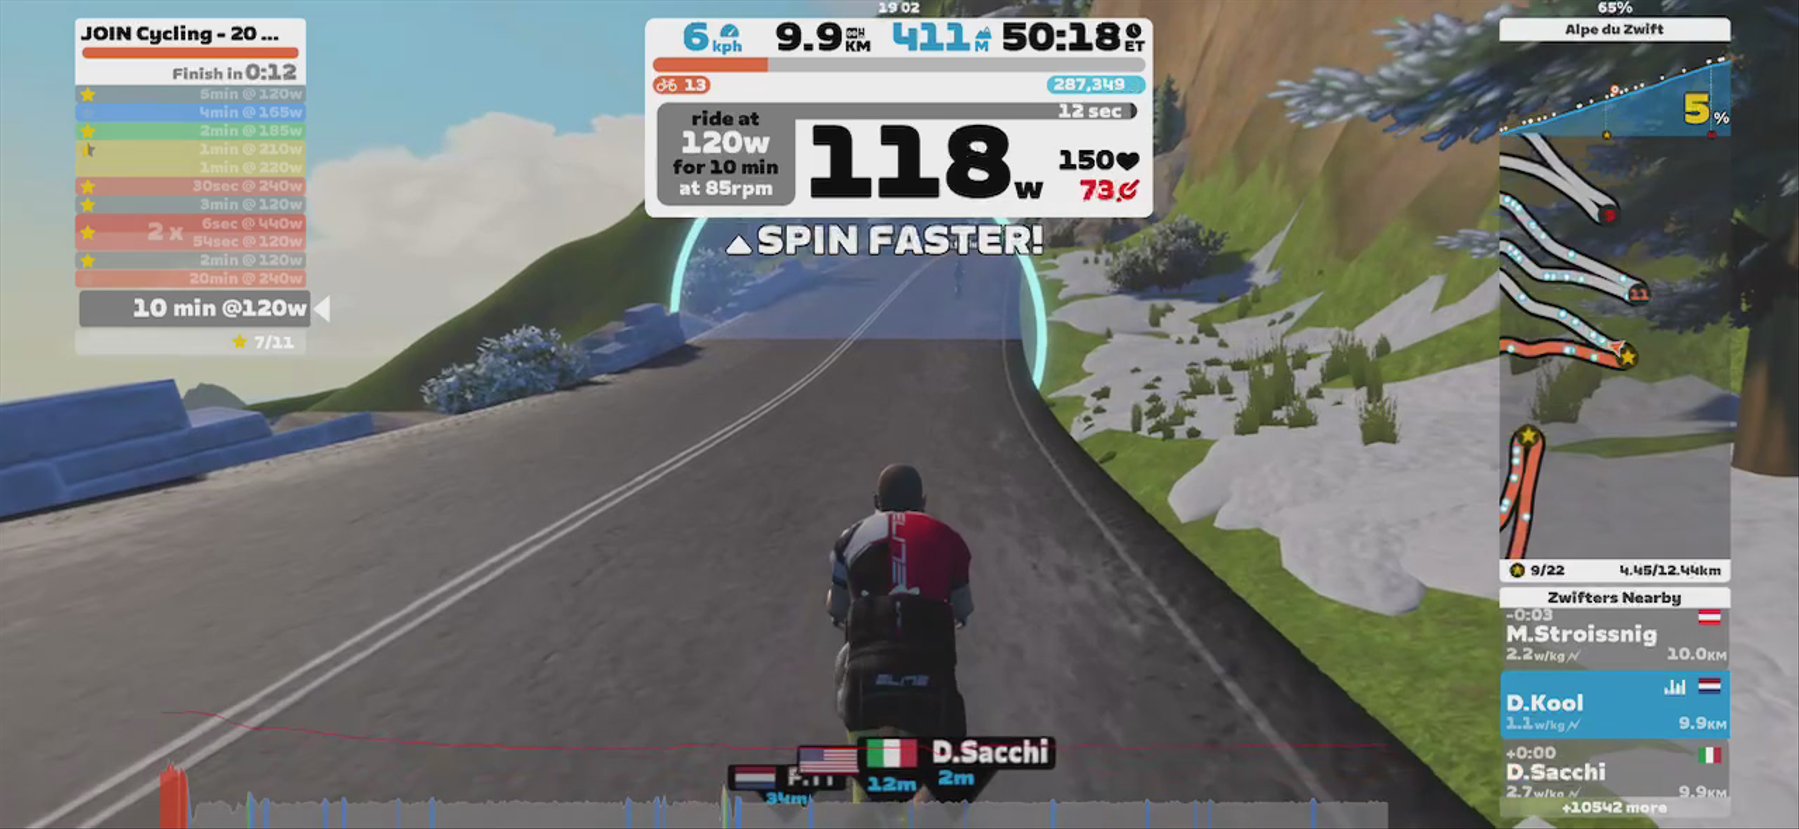 Zwift - JOIN Cycling - 20 min FTP test on Road to Sky in Watopia